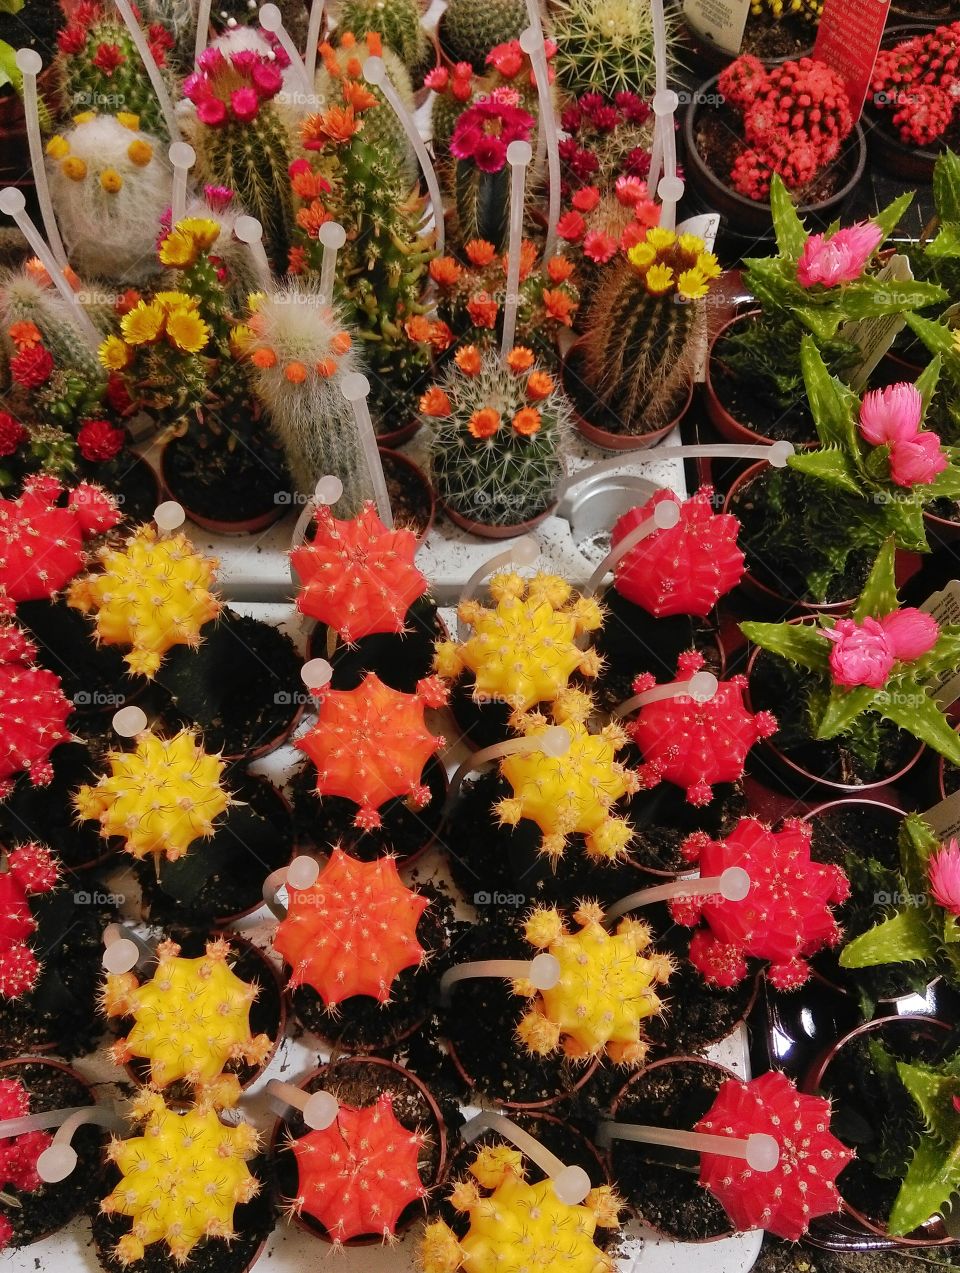 Colorful collection of small cactus plants, in white trays.